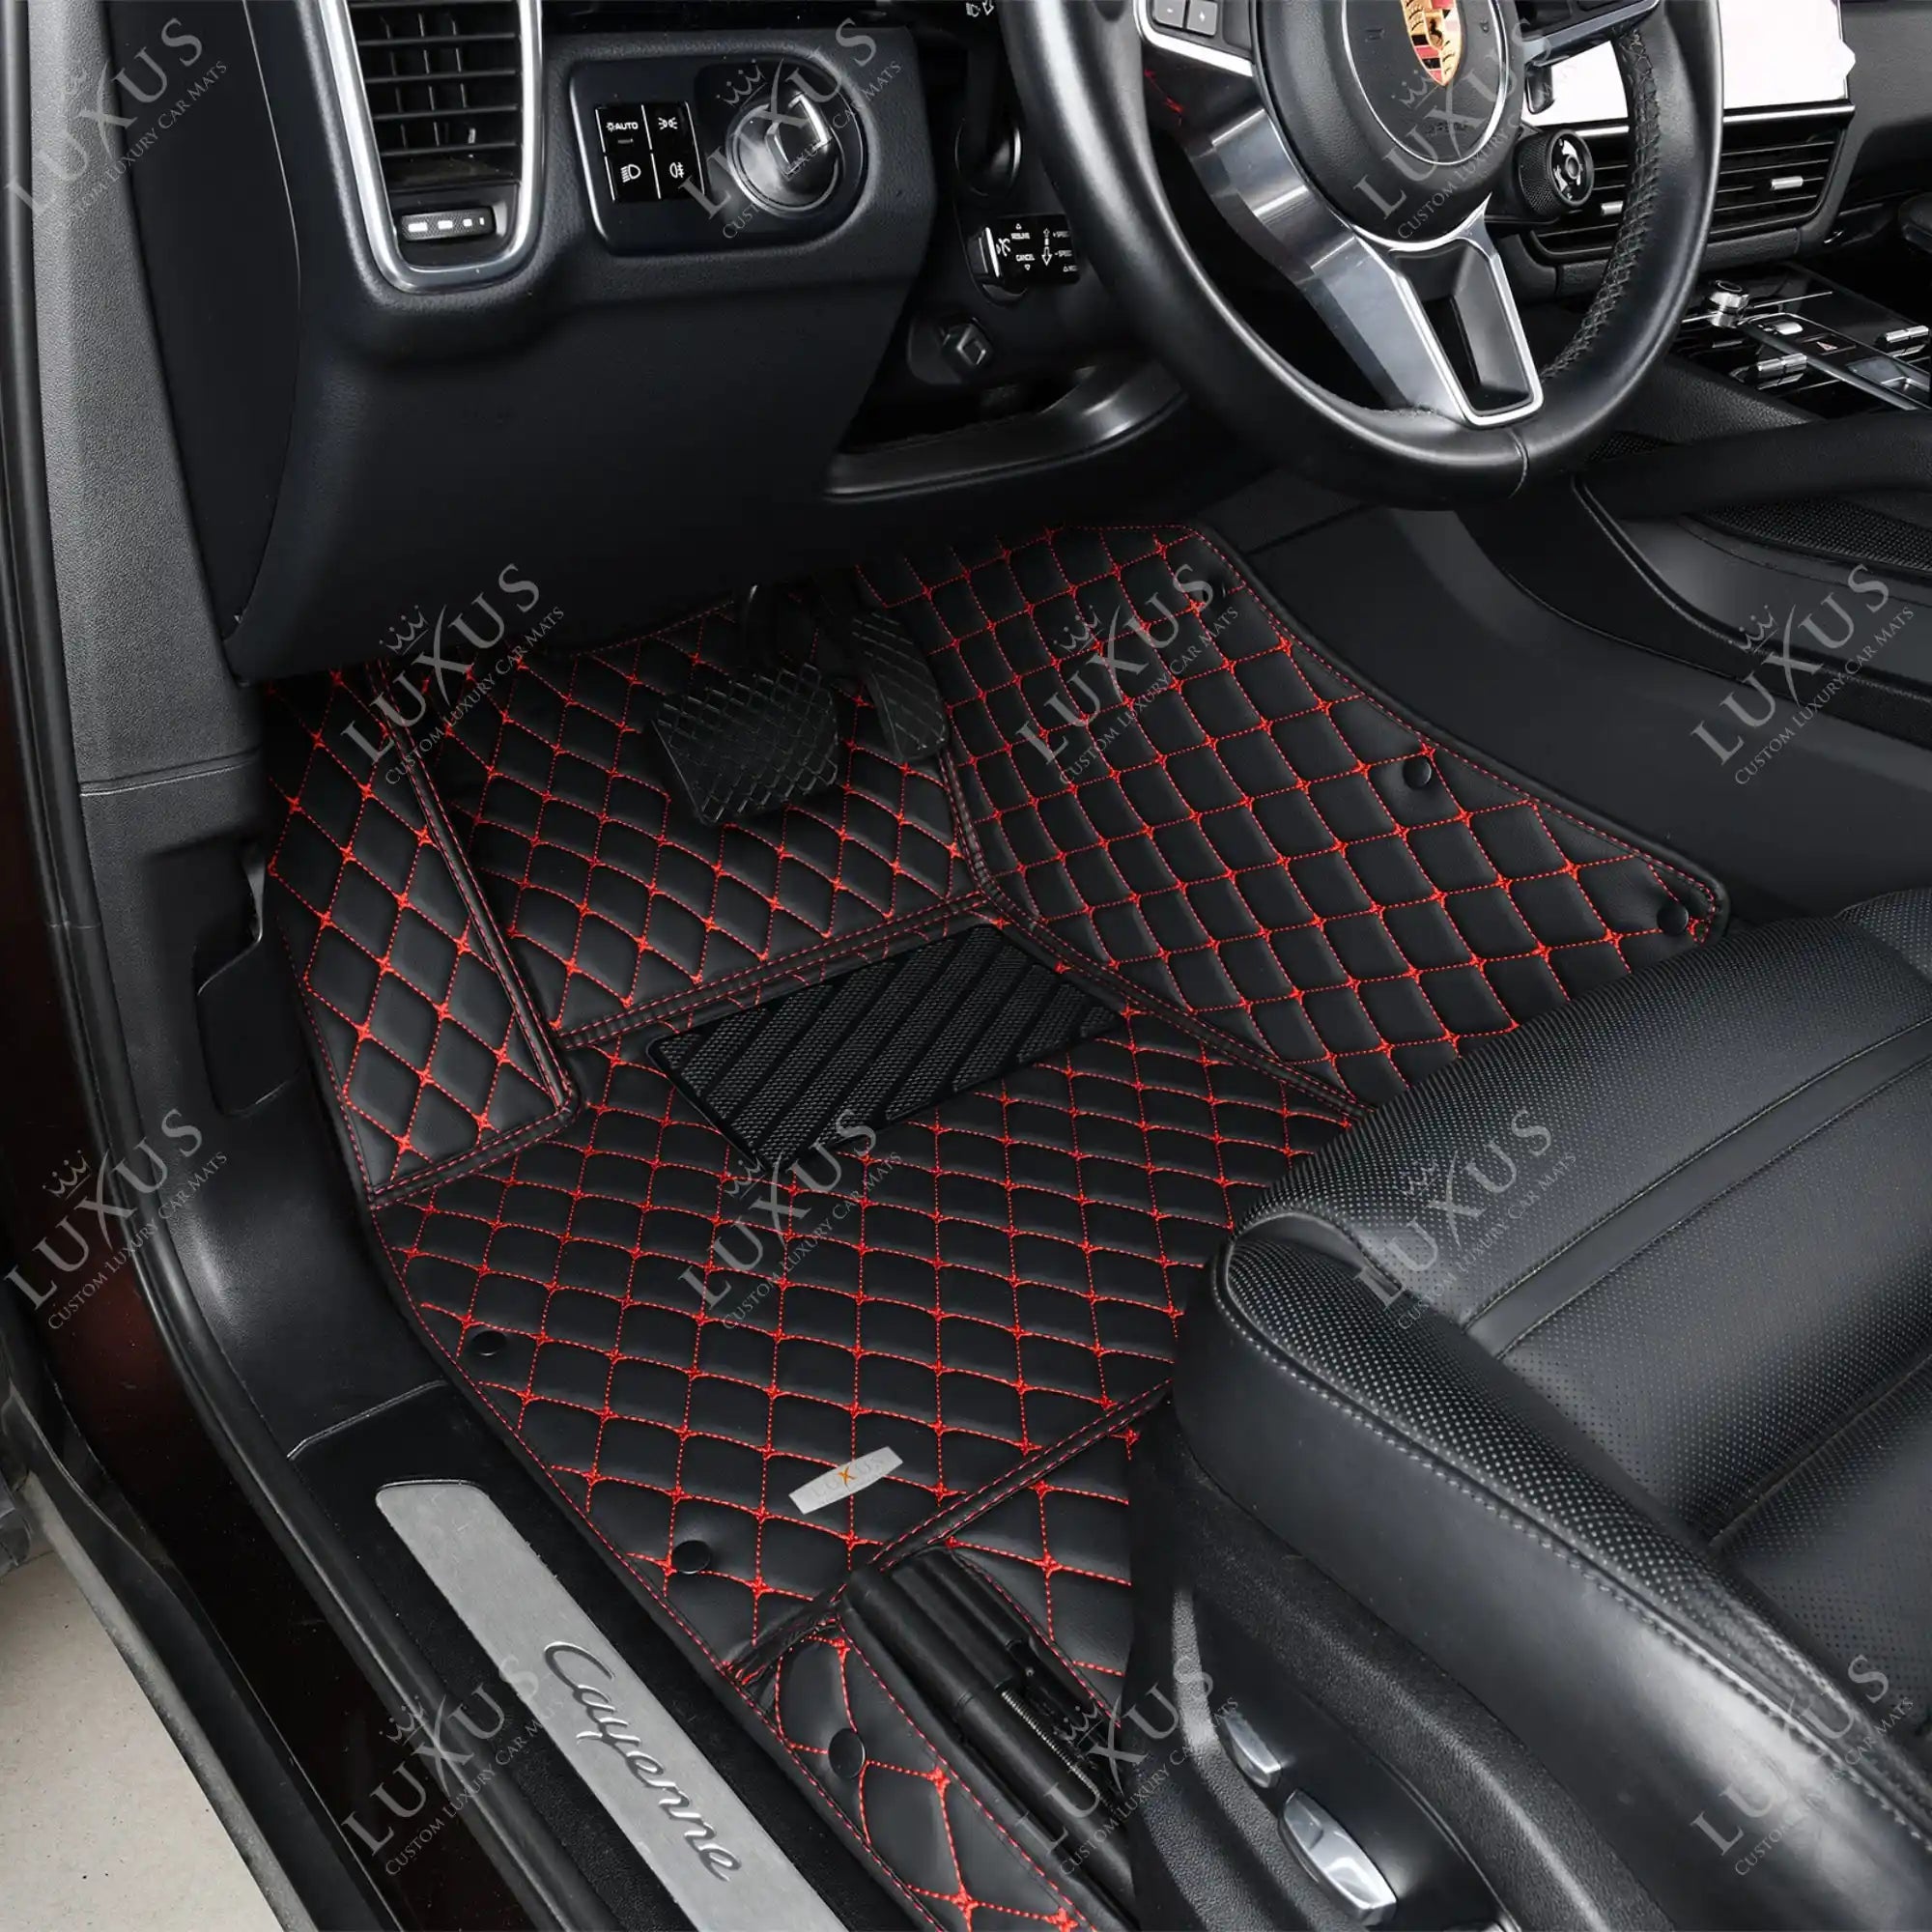 Alpha-Tex Car Mat for Lining, Boot & Vehicle Carpet, Sold by the Metre,  Made to Measure, Hit Anthracite, Cut 2 x 2 m